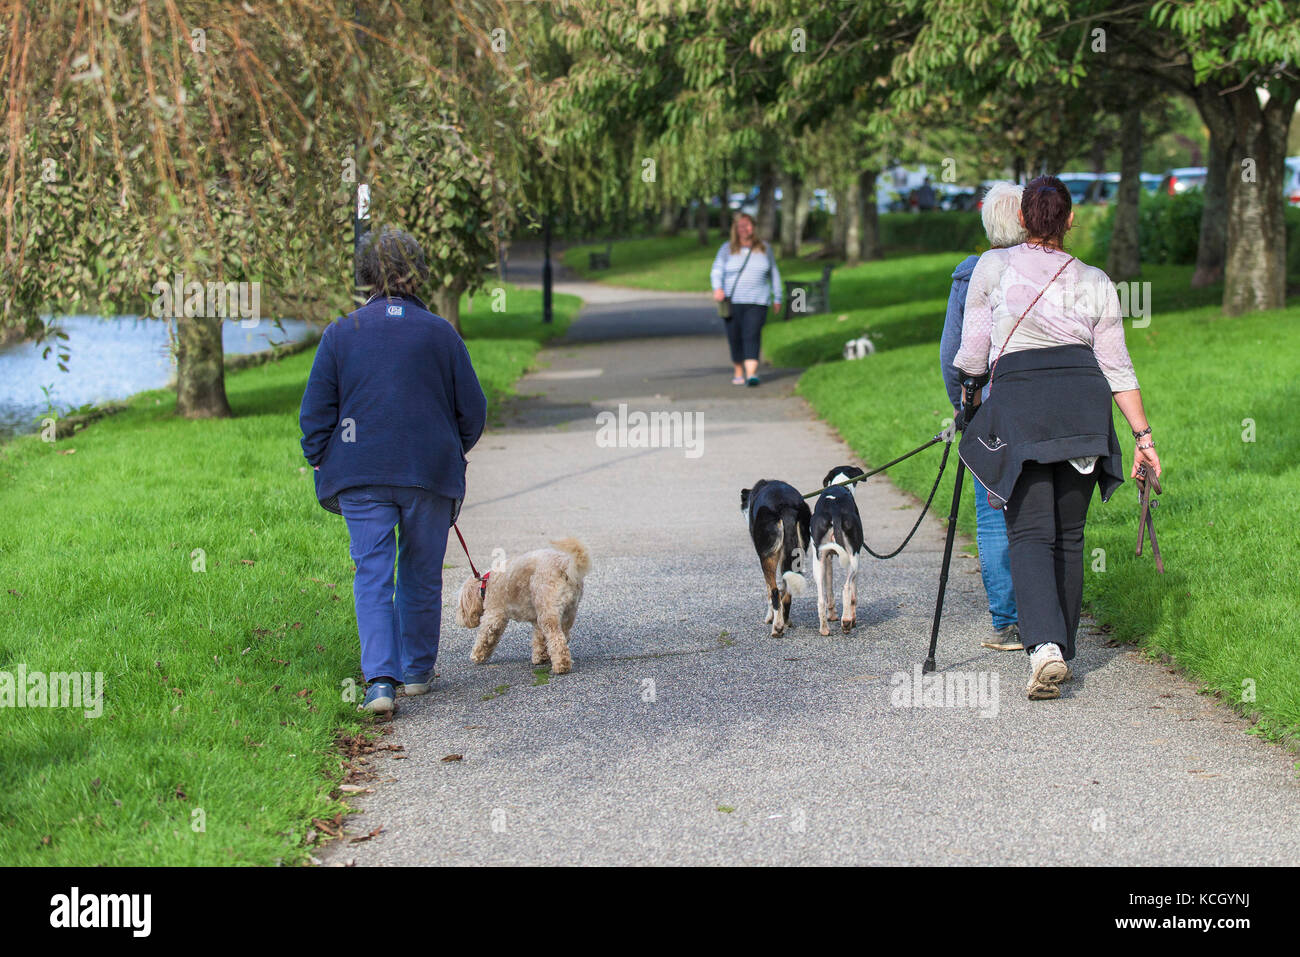 Dog walkers - people walking their dog in a park. Stock Photo